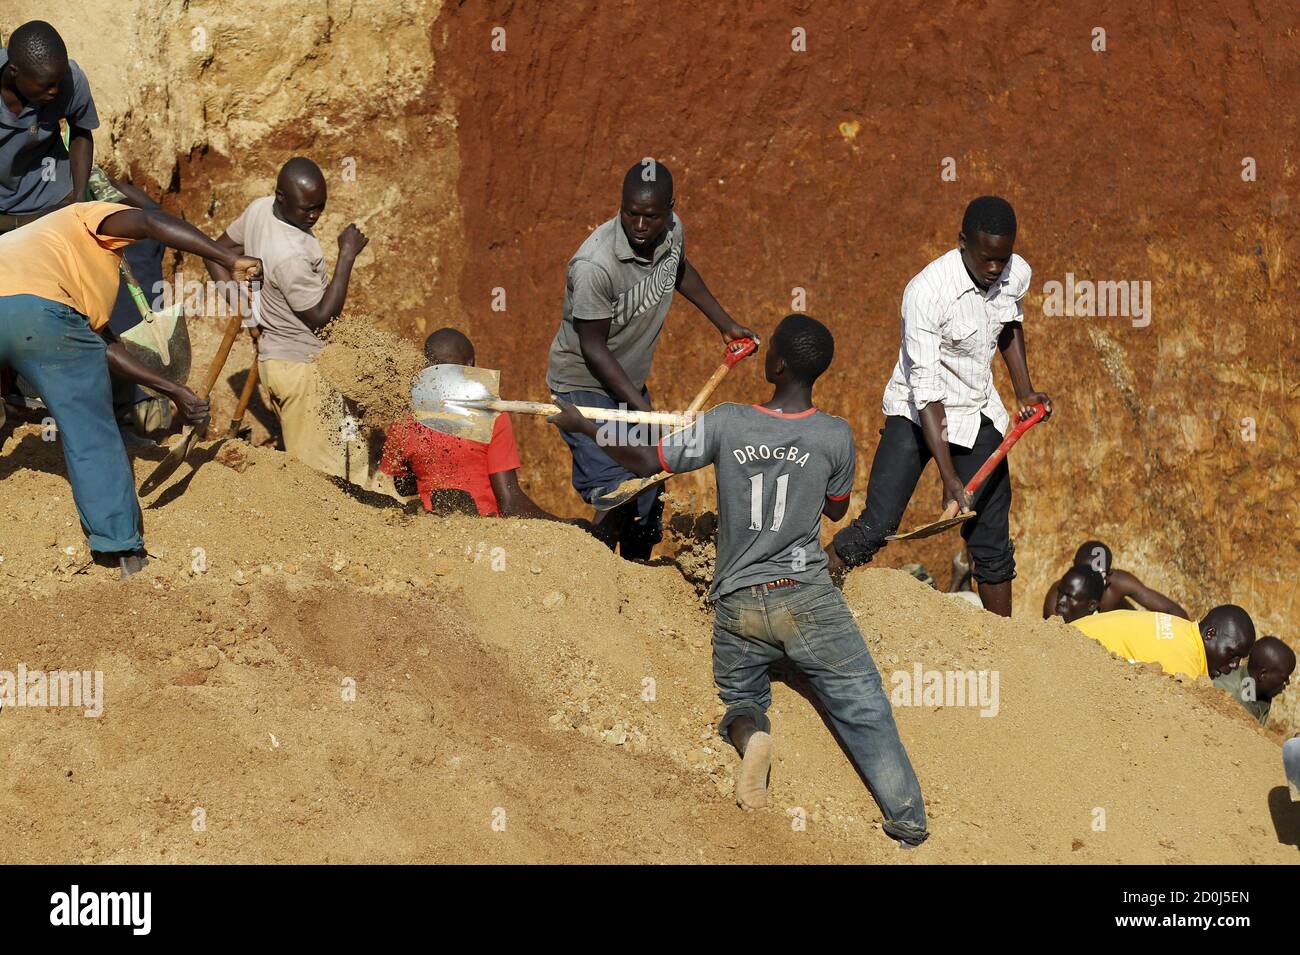 Gold prospectors work at an open-pit in the U.S. President Barack Obama's ancestral village of Nyang'oma Kogelo, west of Kenya's capital Nairobi, July 15, 2015. President Obama visits Kenya and Ethiopia in July, his third major trip to Sub-Saharan Africa after travelling to Ghana in 2009 and to Tanzania, Senegal and South Africa in 2011. He has also visited Egypt, in North Africa, and South Africa for Nelson Mandela's funeral. Obama will be welcomed by a continent that had expected closer attention from a man they claim as their son, a sentiment felt acutely in the Kenyan village where the 44t Stock Photo